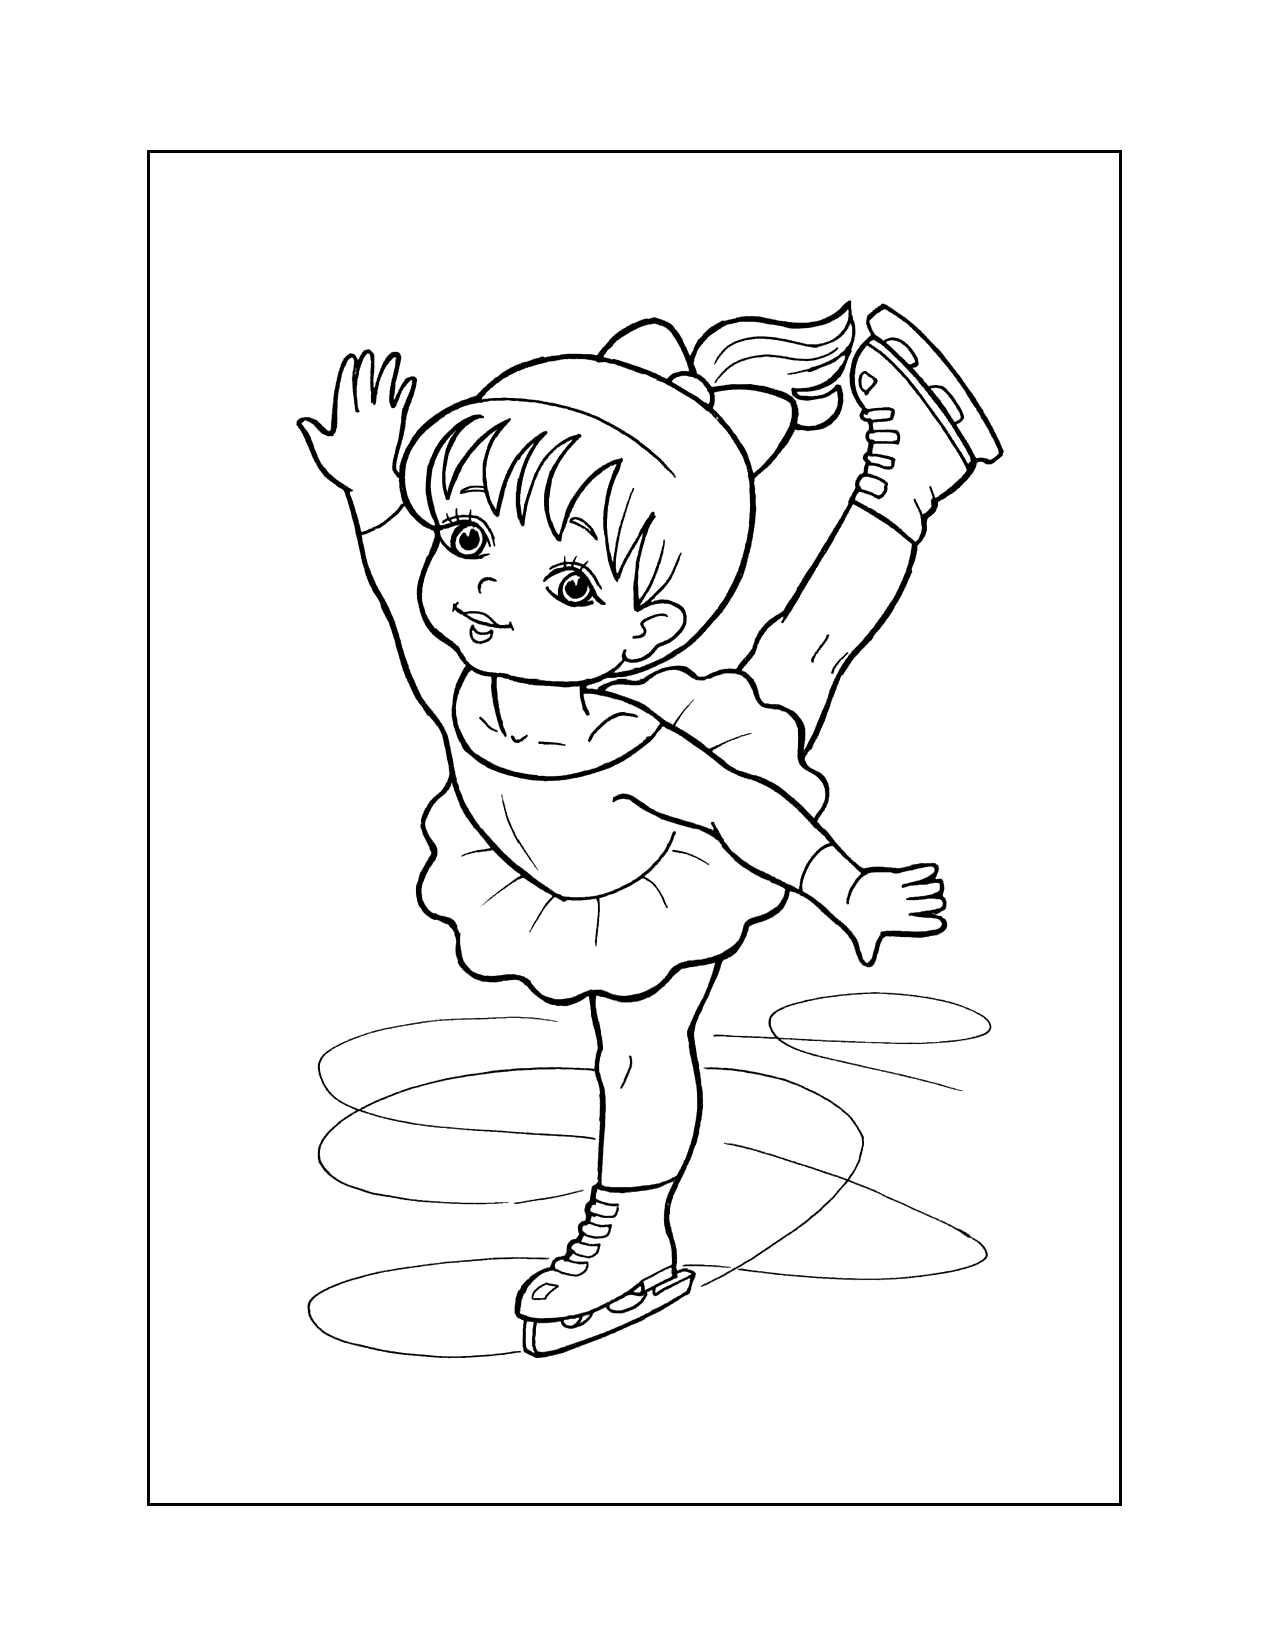 Cute Girl Figure Skating Coloring Page